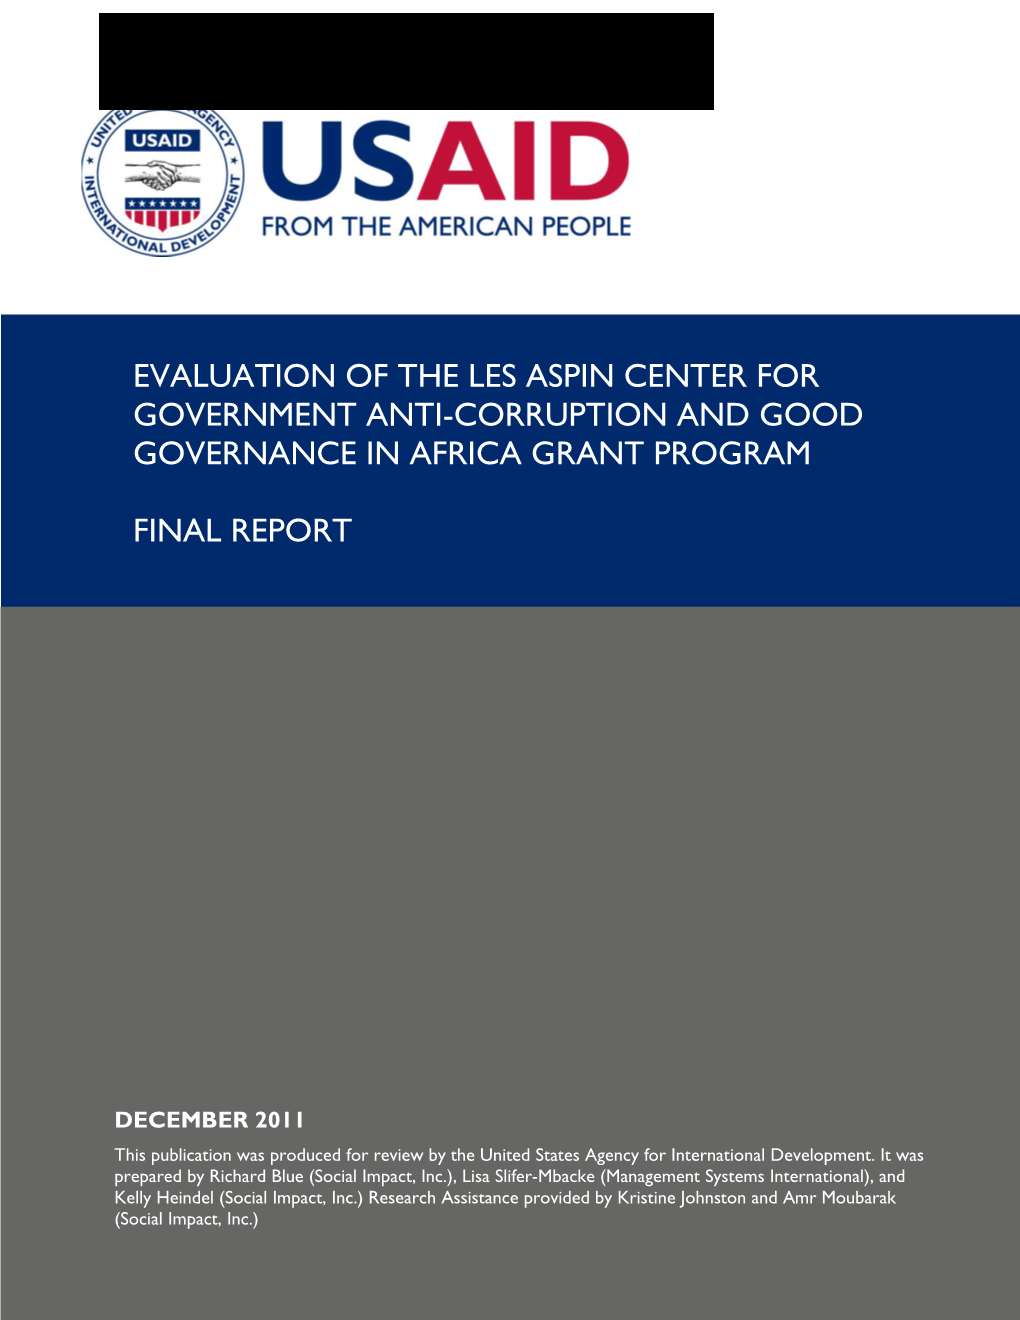 Evaluation of the Les Aspin Center for Government Anti-Corruption and Good Governance in Africa Grant Program